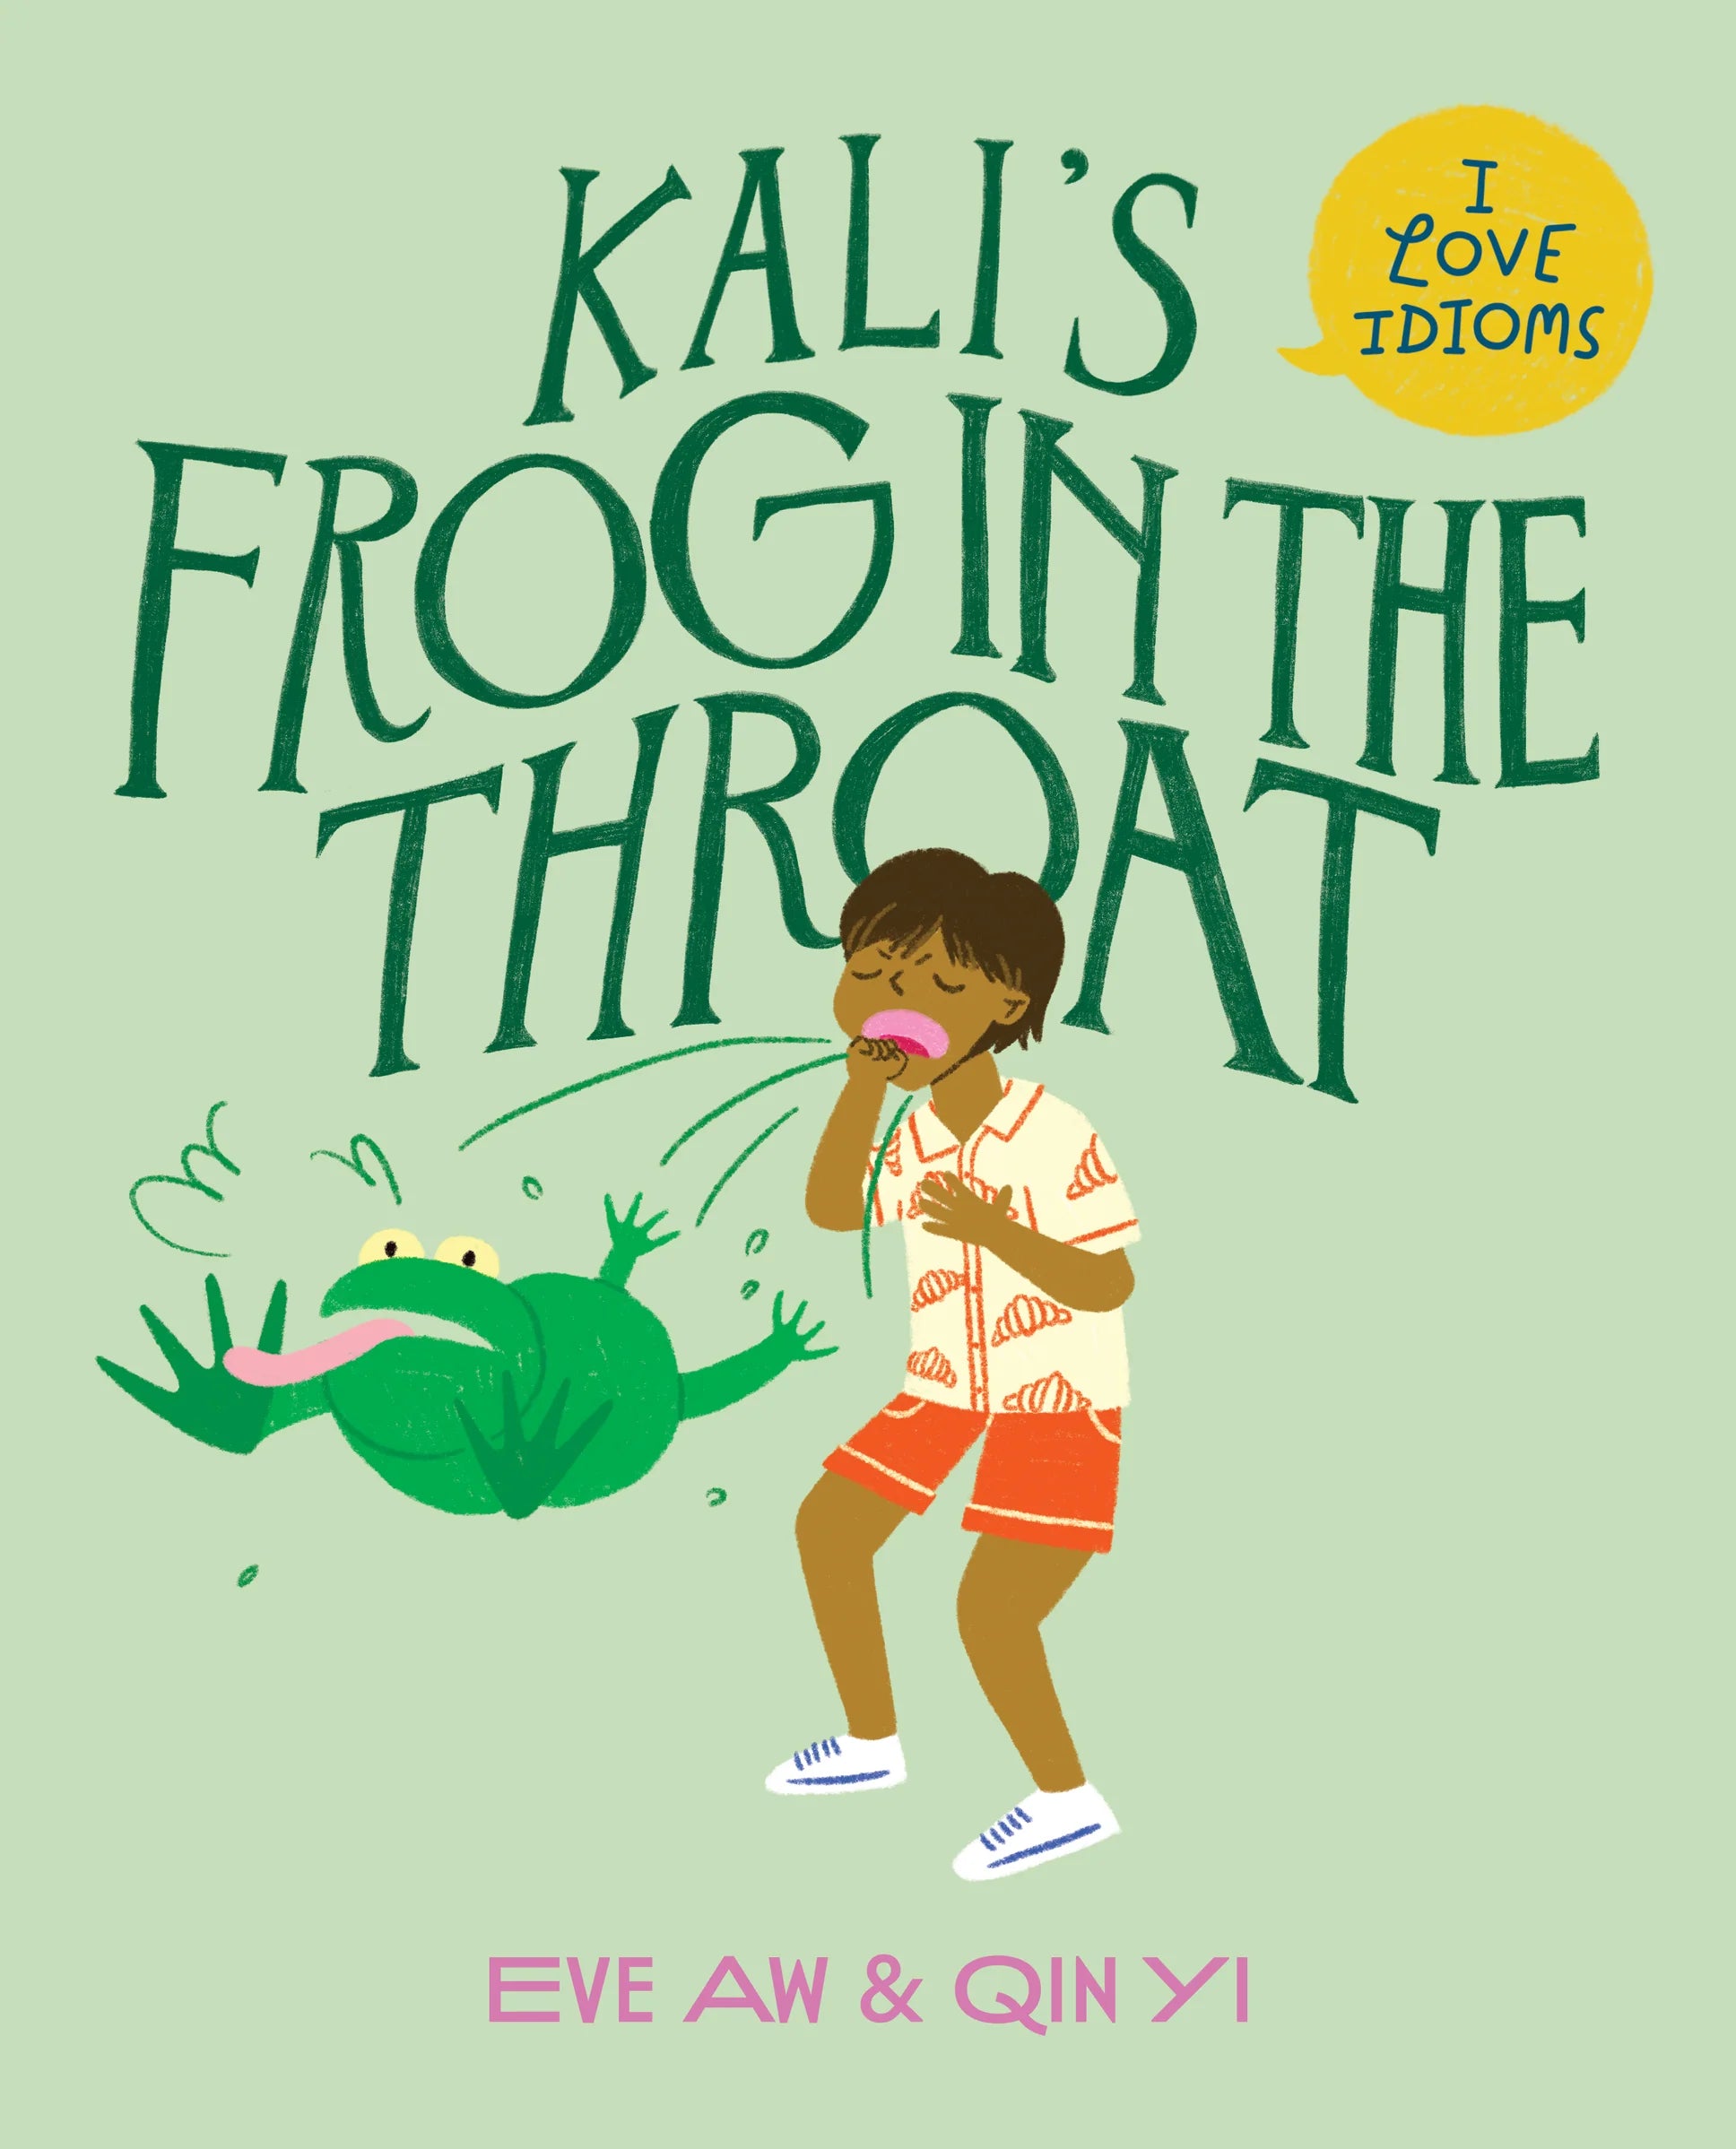 I Love Idioms #1: Kali's Frog In The Throat